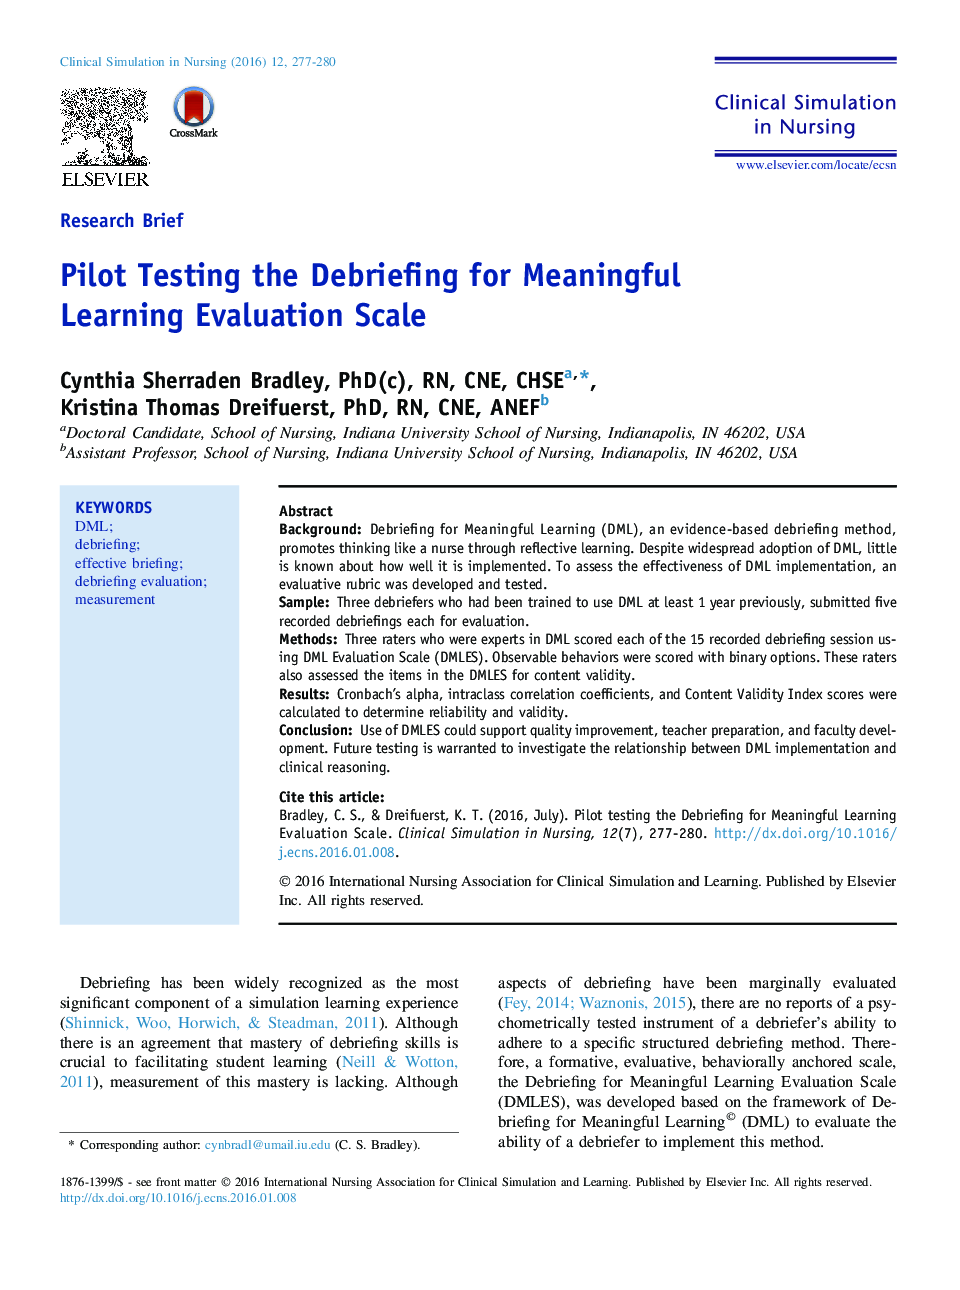 Pilot Testing the Debriefing for Meaningful Learning Evaluation Scale